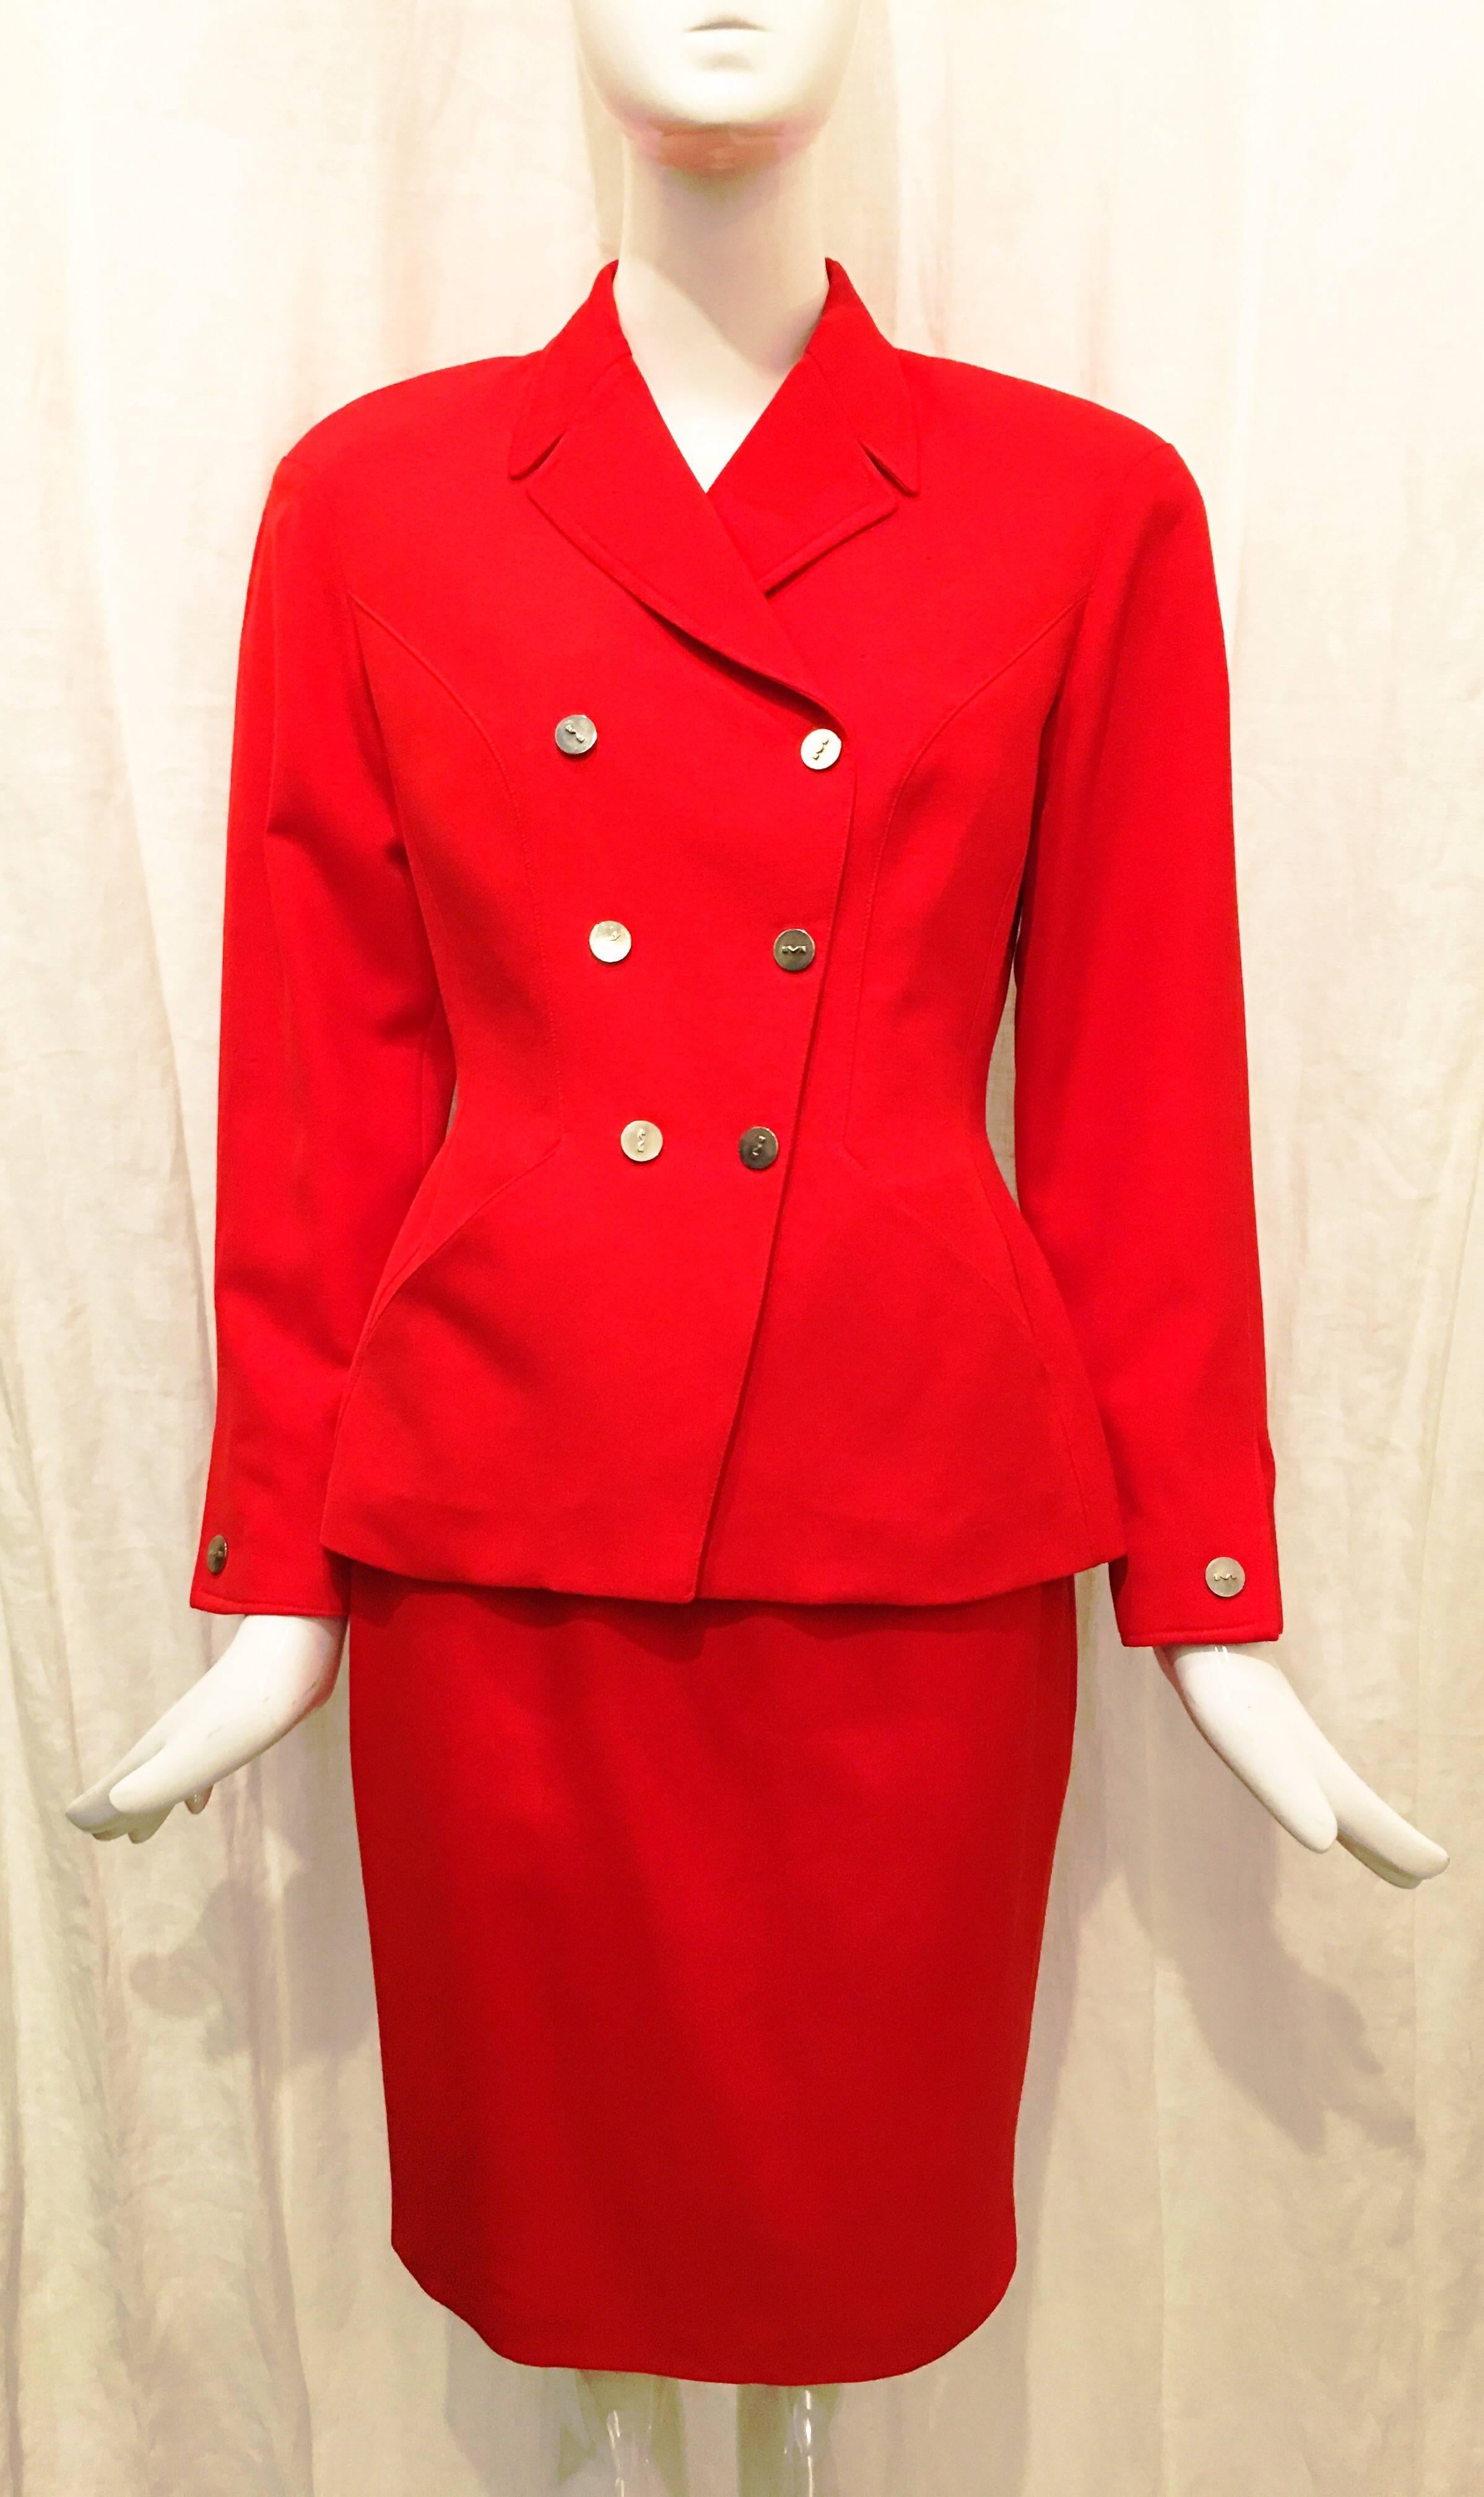 Red double breasted suit jacket with six silver Mugler logo buttons at front. Two angled pockets at front of jacket. Shape is extremely flattering- especially the stitching which creates a slimming illusion. Sharp, pointed collar. Single snap